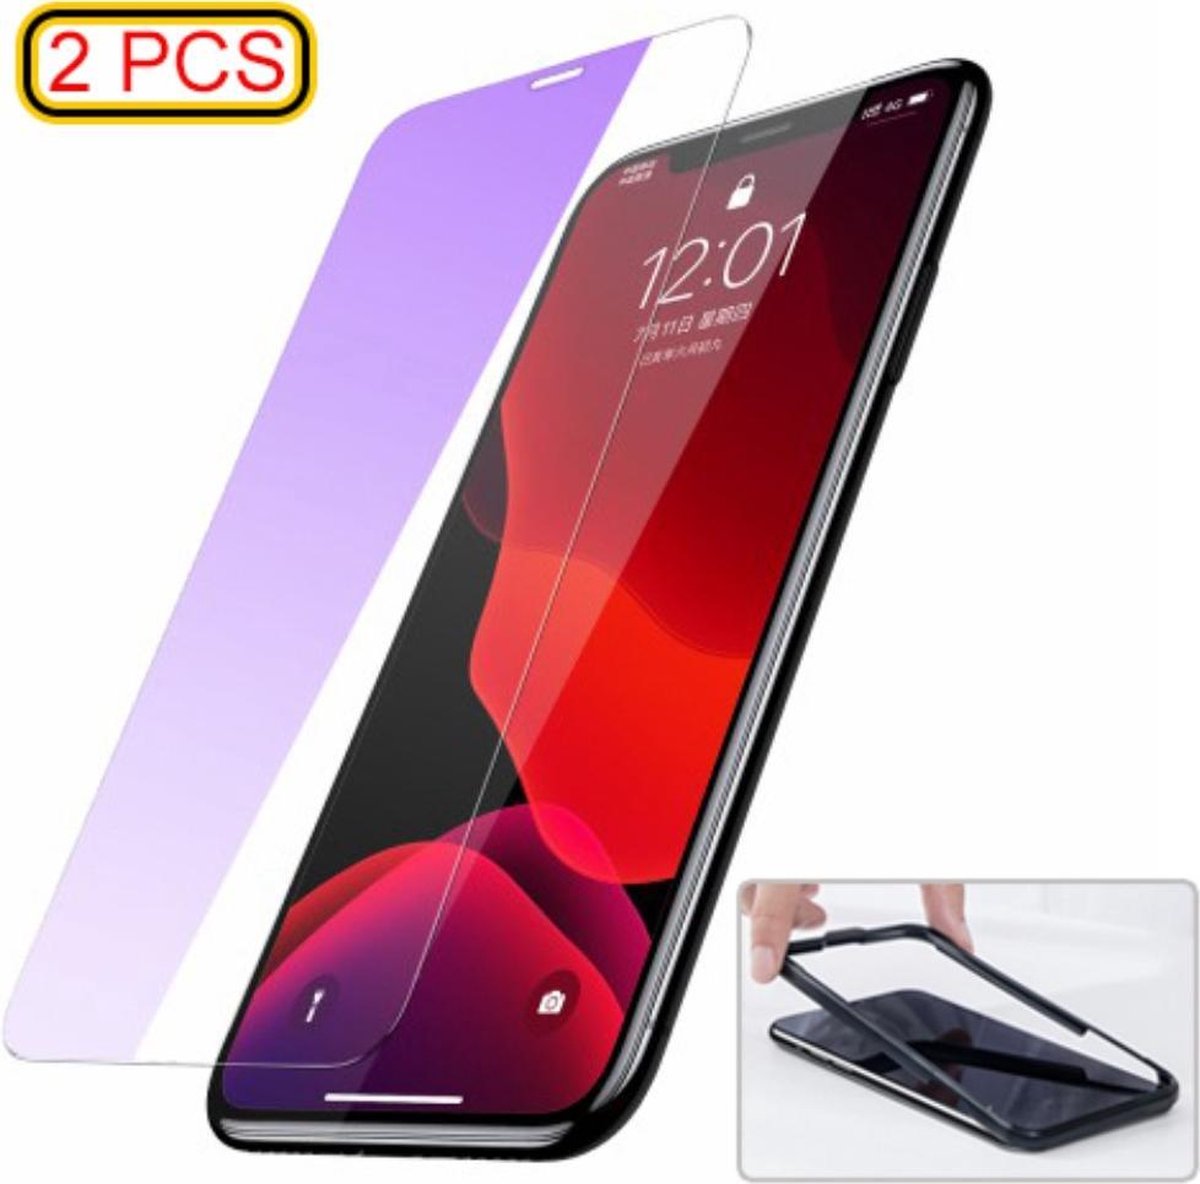 0.3mm Anti-blue-ray Tempered Glass Screen Protector voor iPhone XS Max / iPhone 11 Pro Max (2 stuks) - Baseus